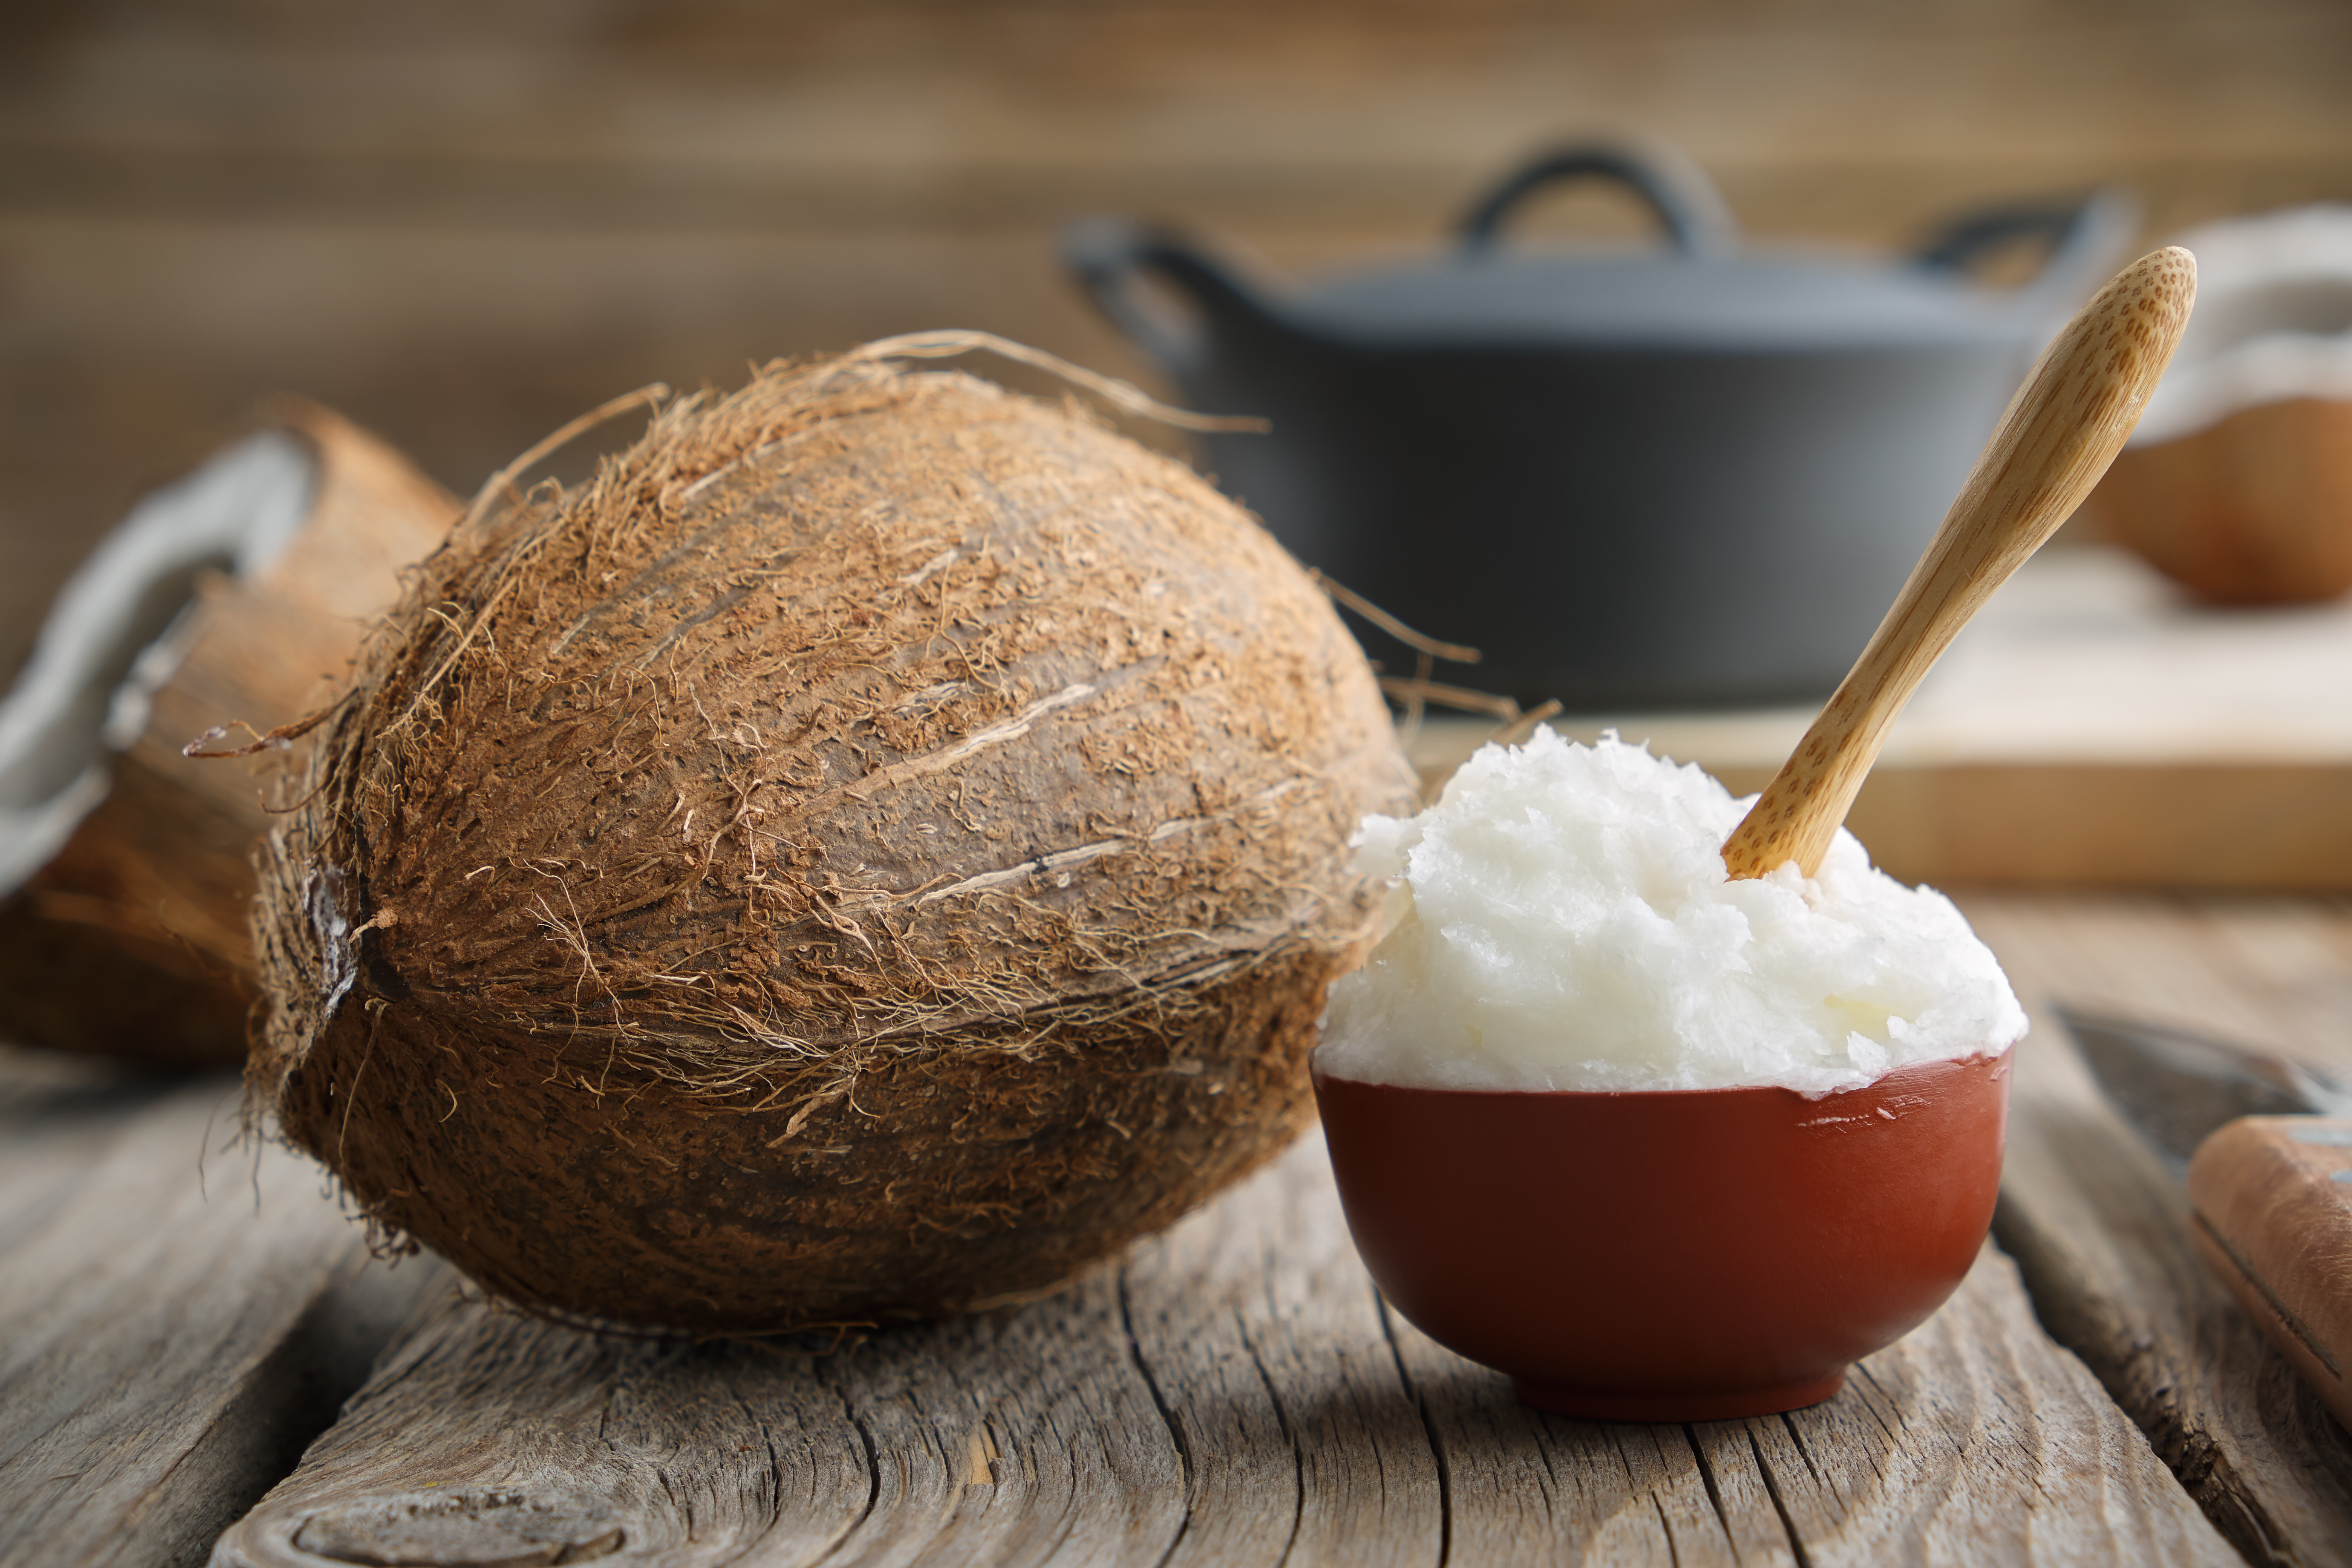 Healthy coconut oil for cooking in ceramic bowl and coconuts on wooden kitchen table.